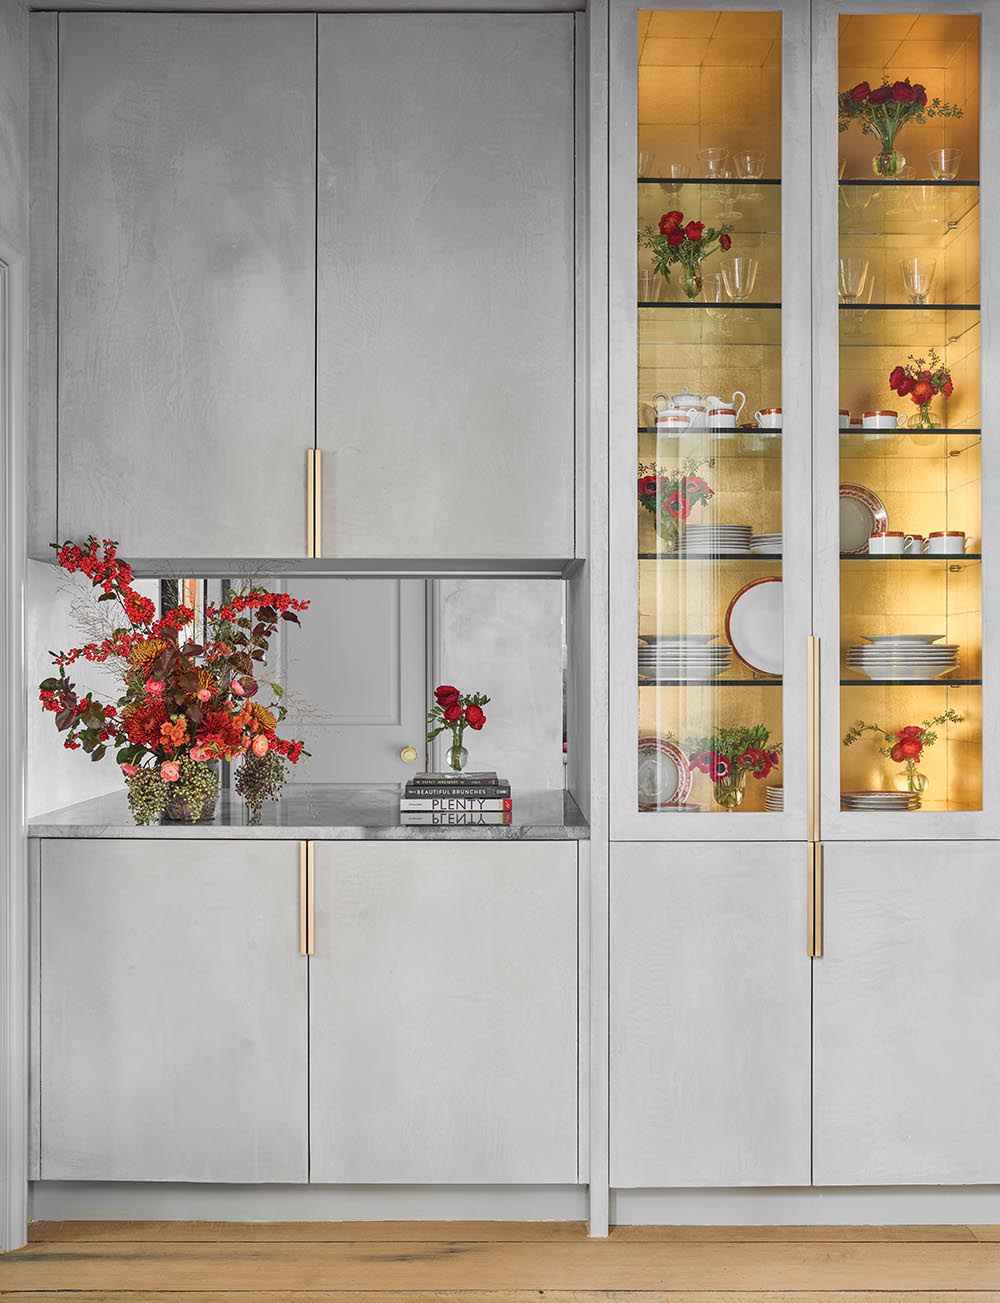 Cabinets witth a gray plaster pastellone finish from Domingue and counter with a red arrangement of pyracantha berries and flowers. Glass doored cabinet lined with gold wallpaper is filled with red and white china and vases of red ranunculus.